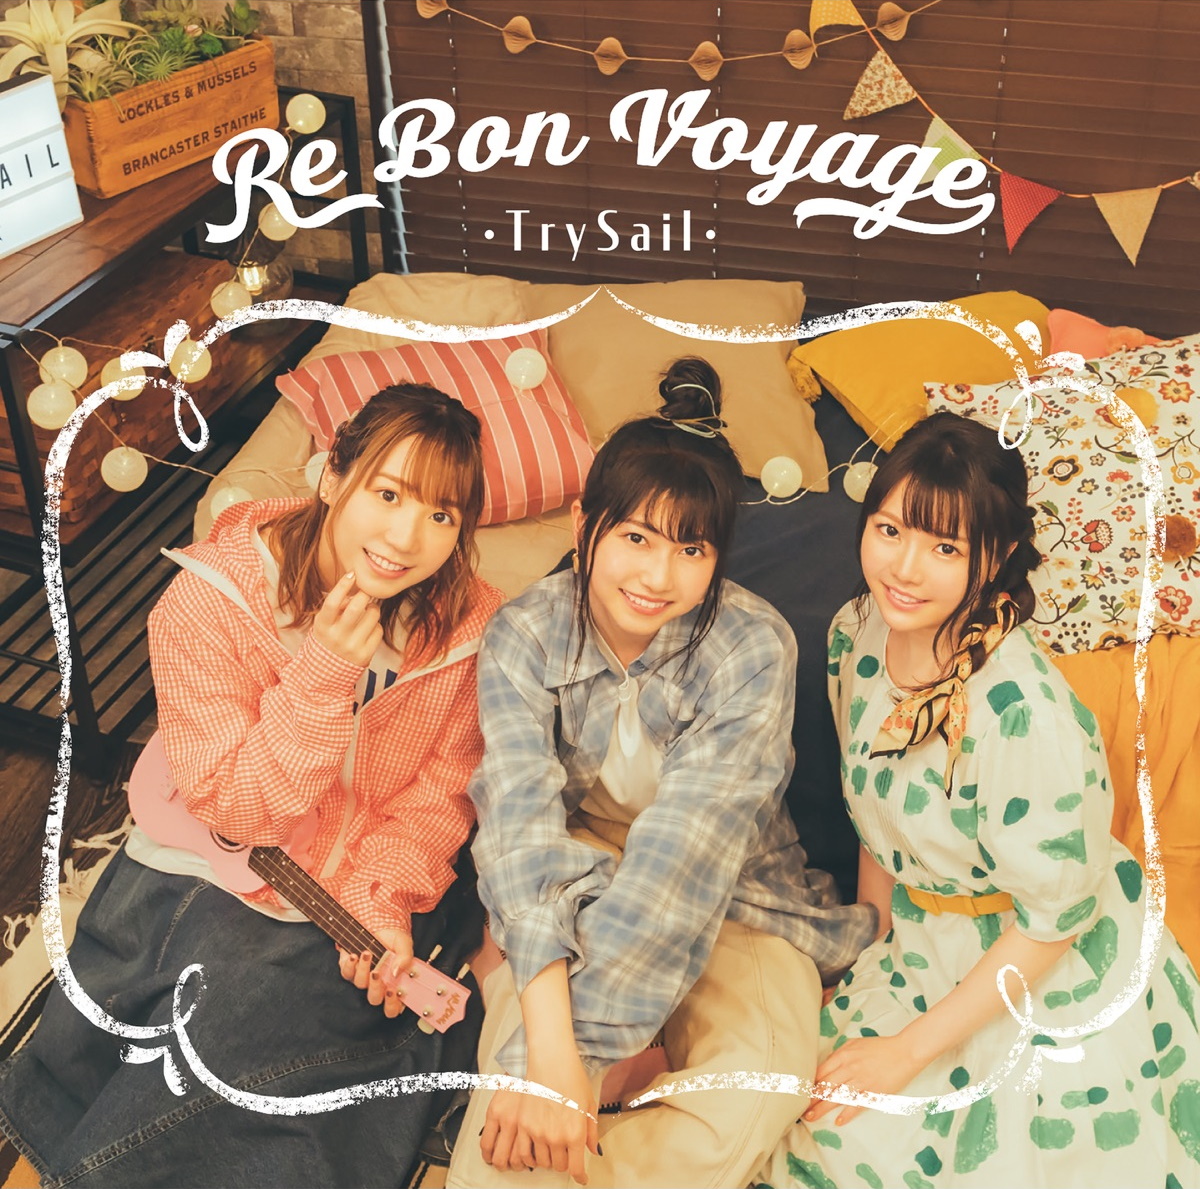 Cover art for『TrySail - Favorite Days』from the release『Re Bon Voyage』